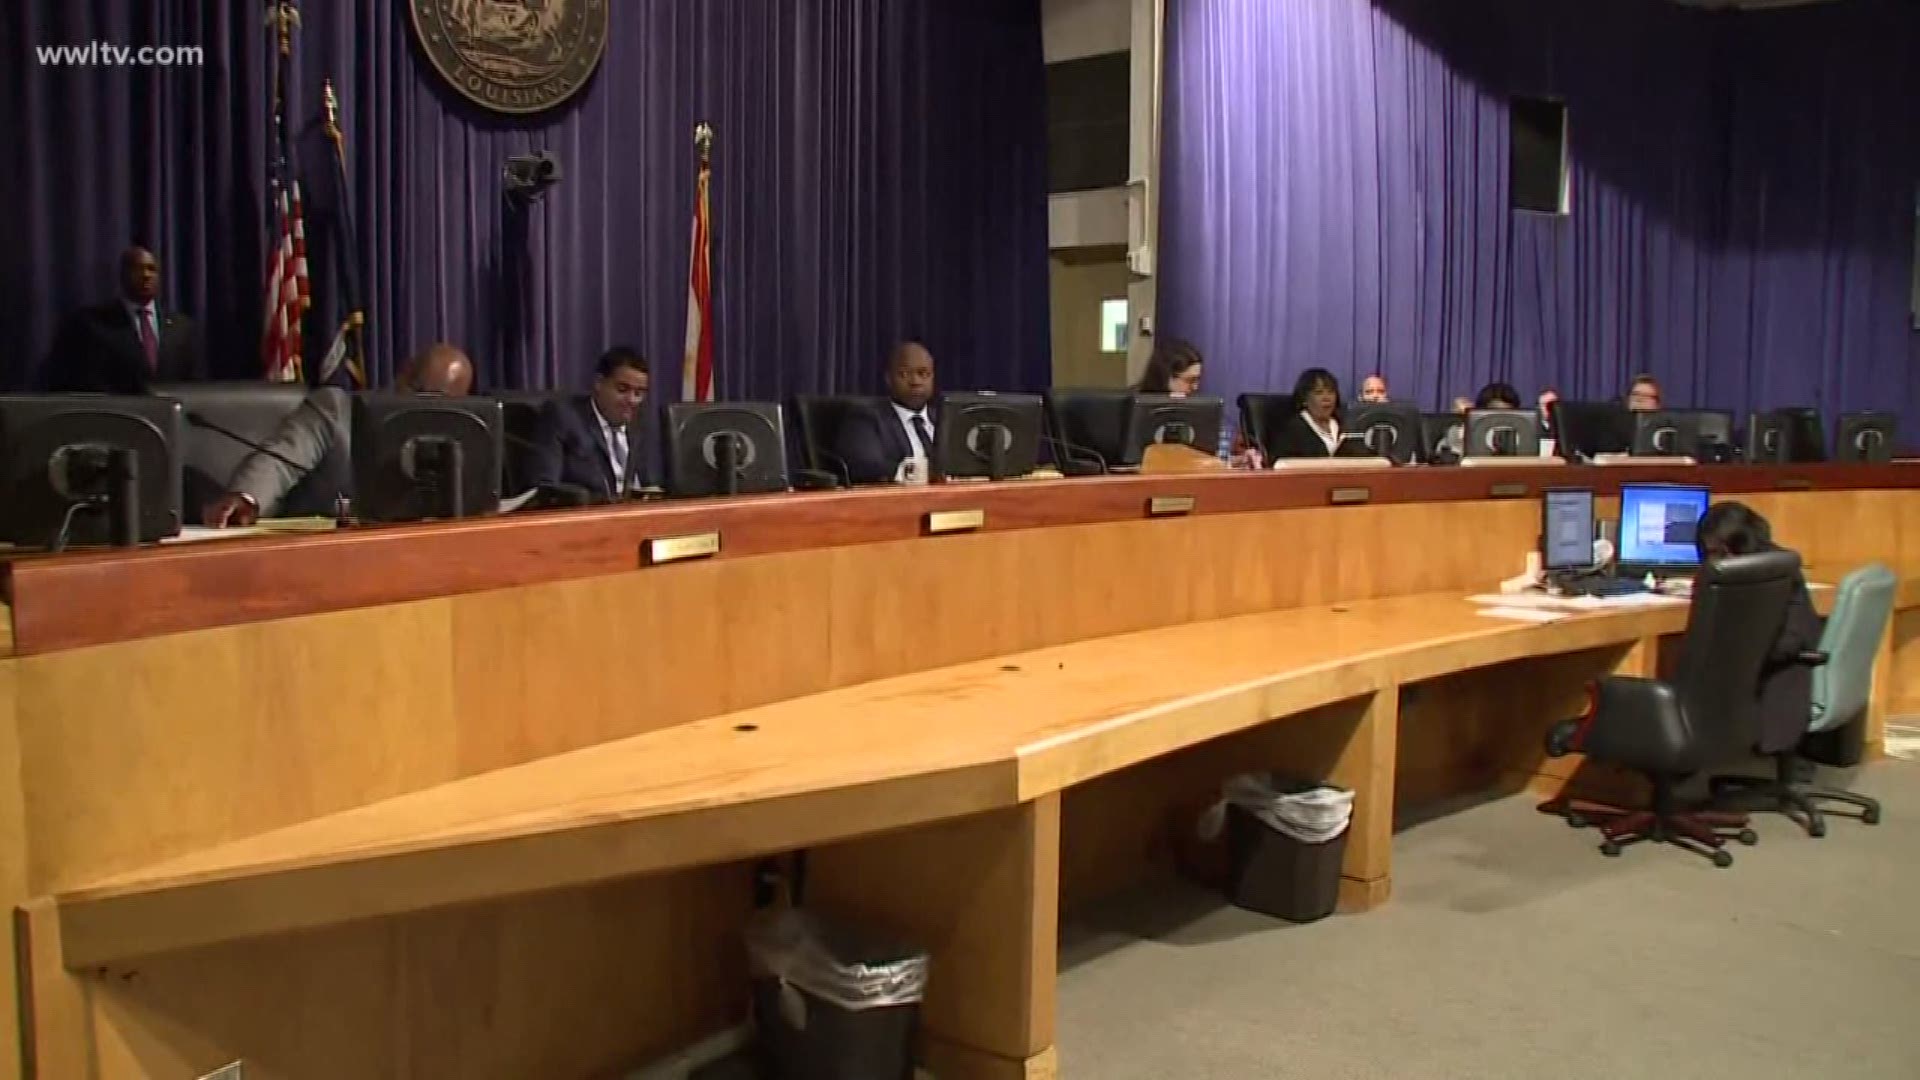 Council members were the first officials to point fingers after the S&WB's power plant and drainage pumps failed miserably Aug. 5, but an investigation by WWL-TV found the same council members repeatedly failed to exercise oversight powers granted to them